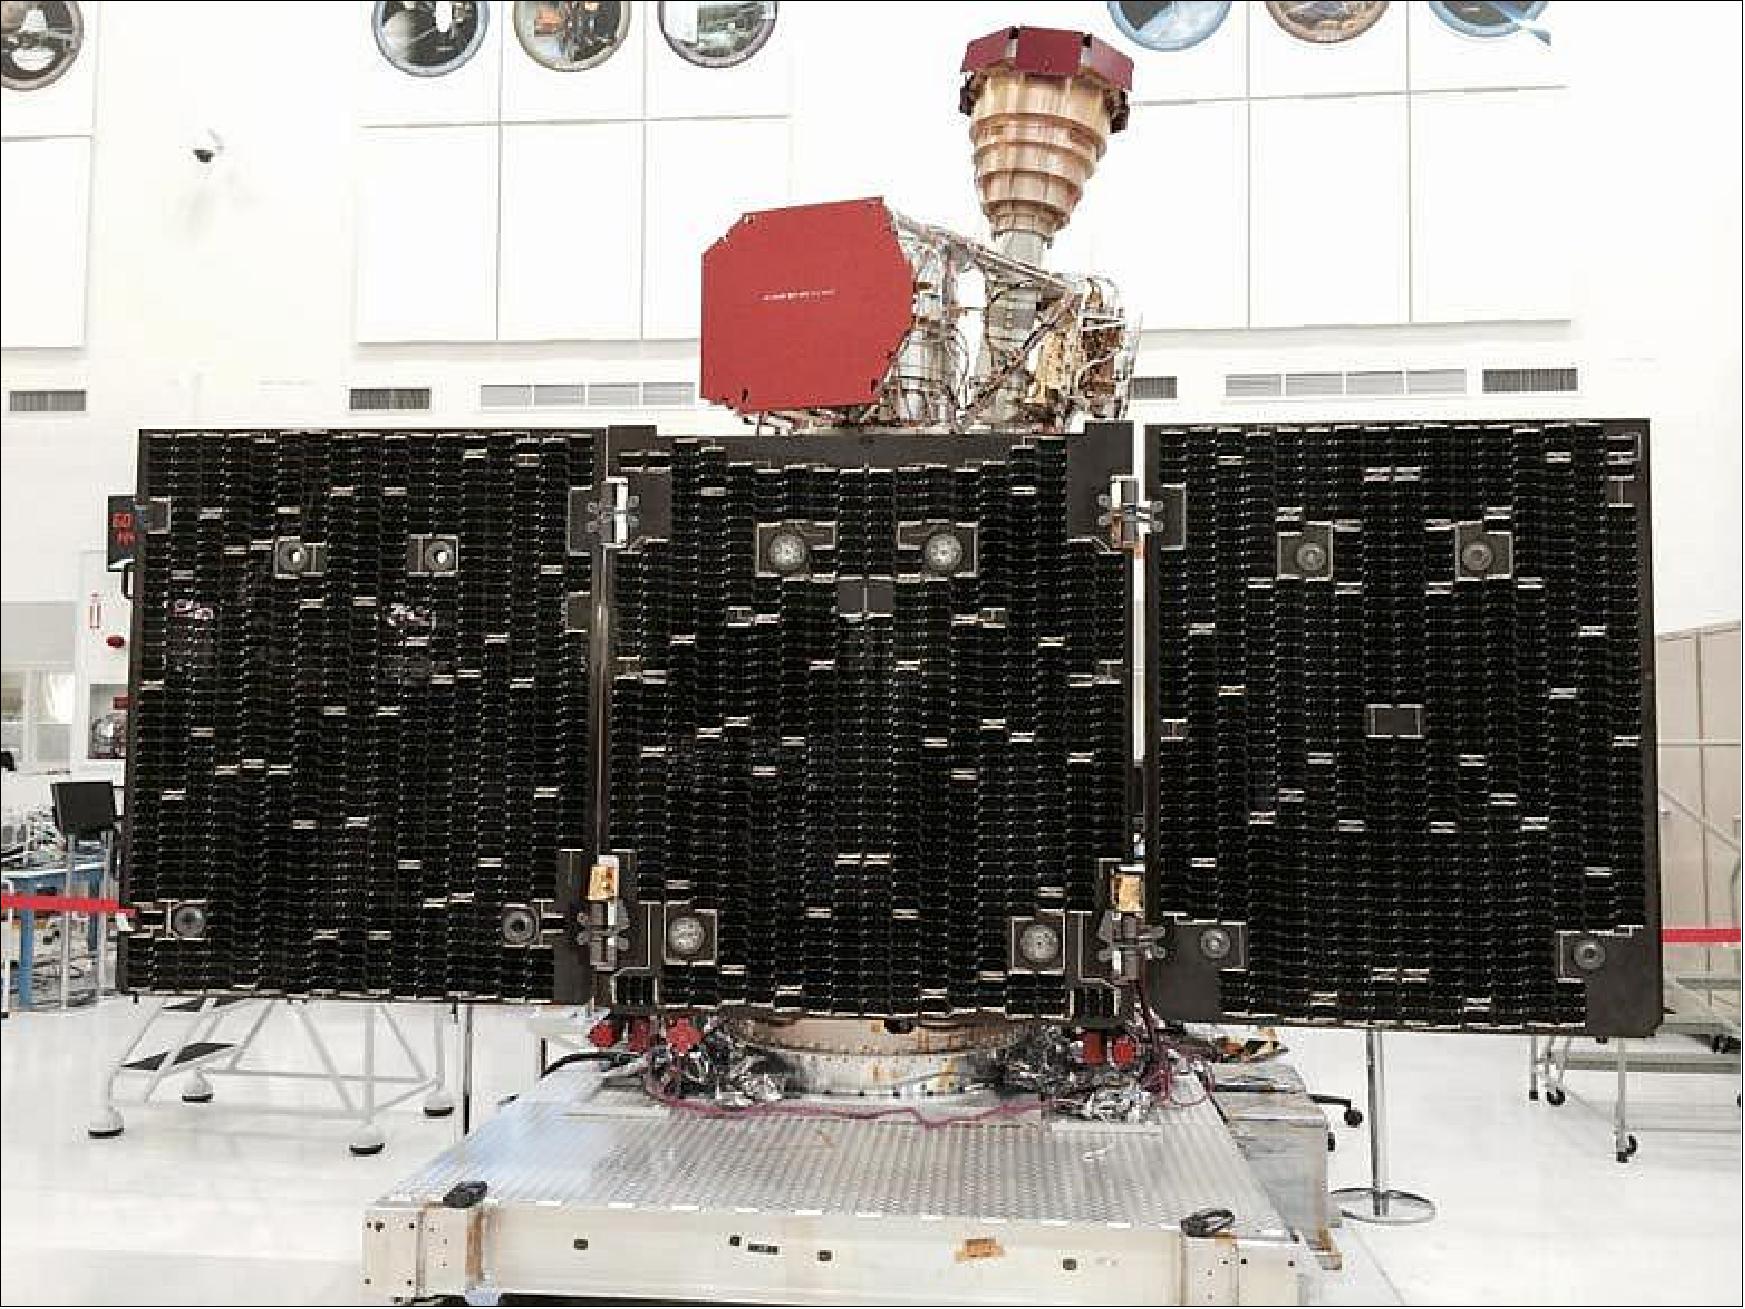 Figure 7: The unfolded solar arrays to power SMAP and the golden feedhorn for its radar and radiometer are visible in this image taken during assembly and testing (image credit: NASA) 22)